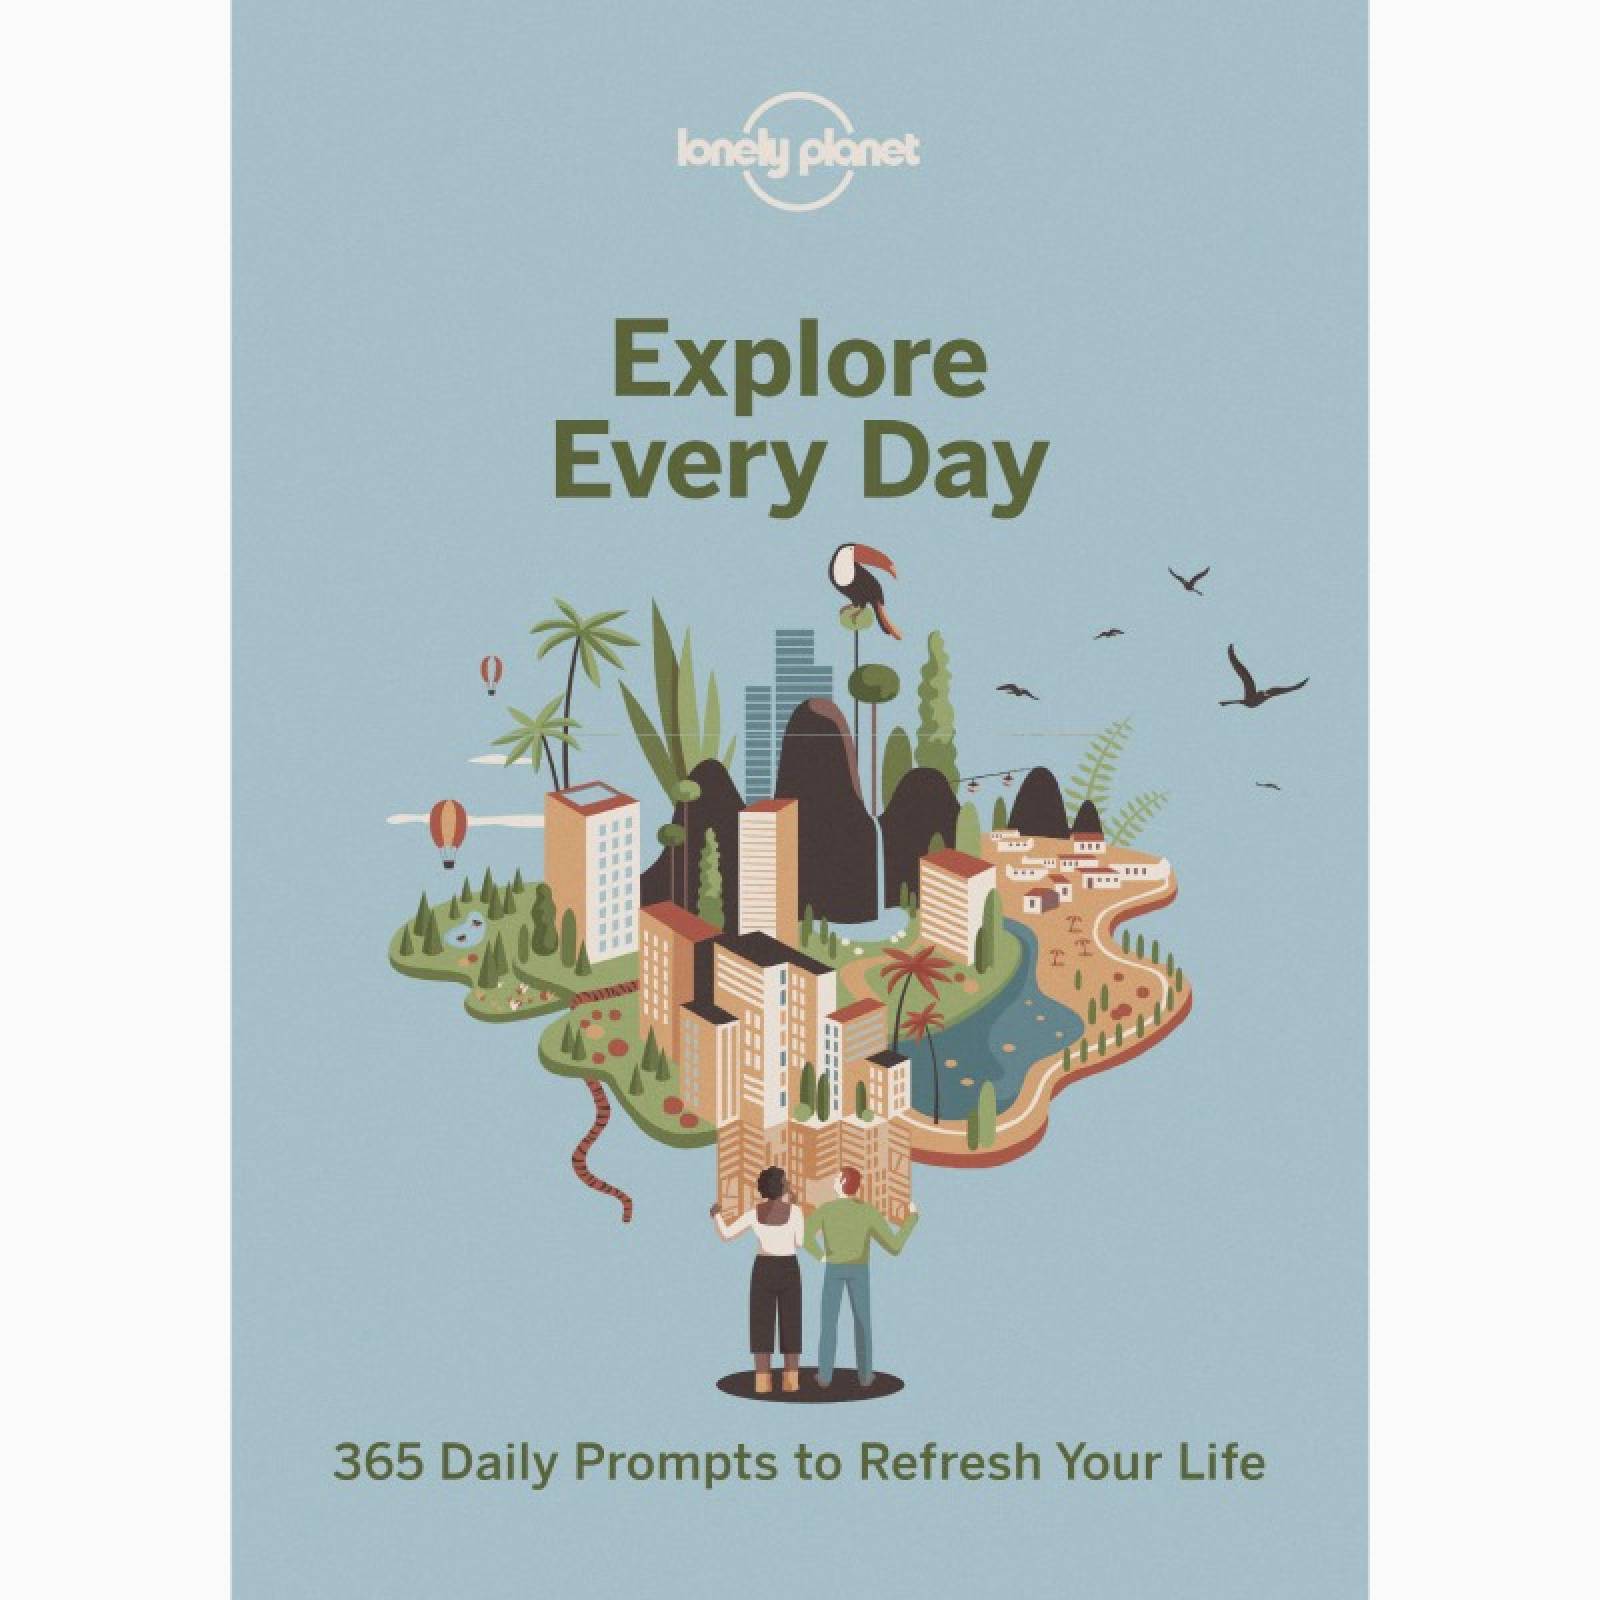 Explore Every Day By Lonely Planet - Paperback Book